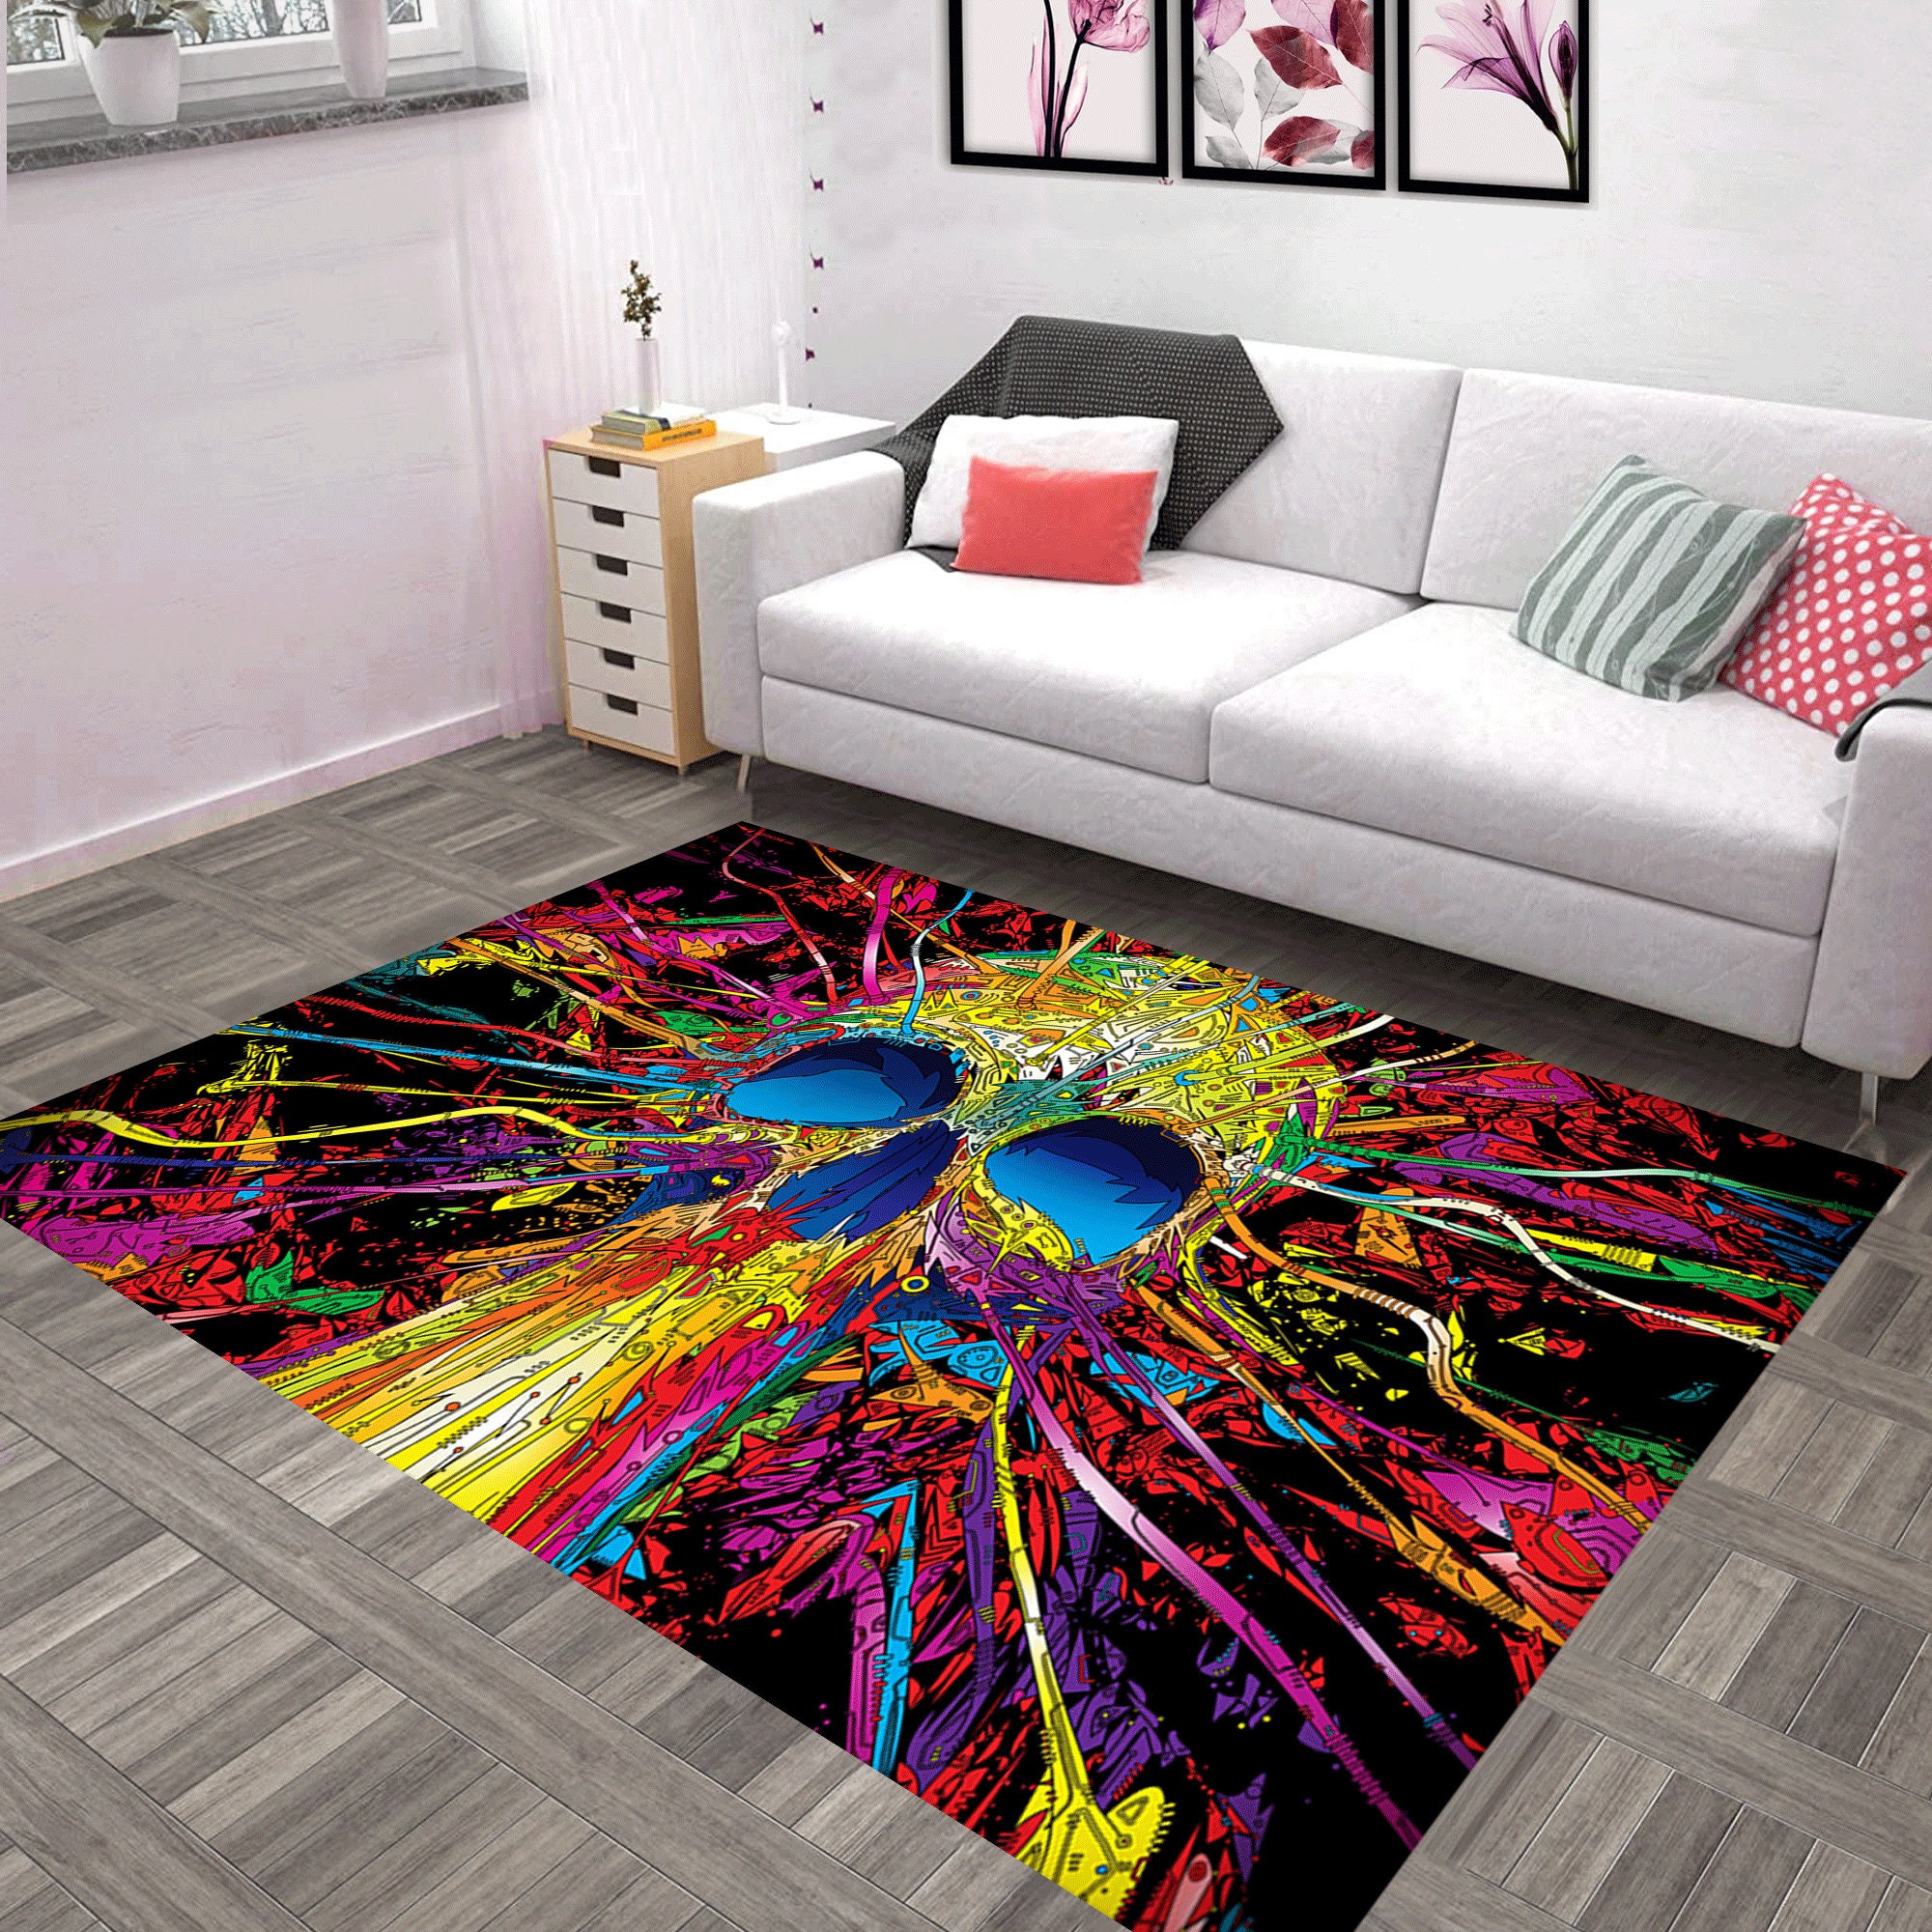 Discover Rugs For Living Room, Rug Runner, Rug arts, Rugs for bedroom,Washable Rug,Colorful Skull Rug, Skull Design Rug, Colorful Rug, Home Decor